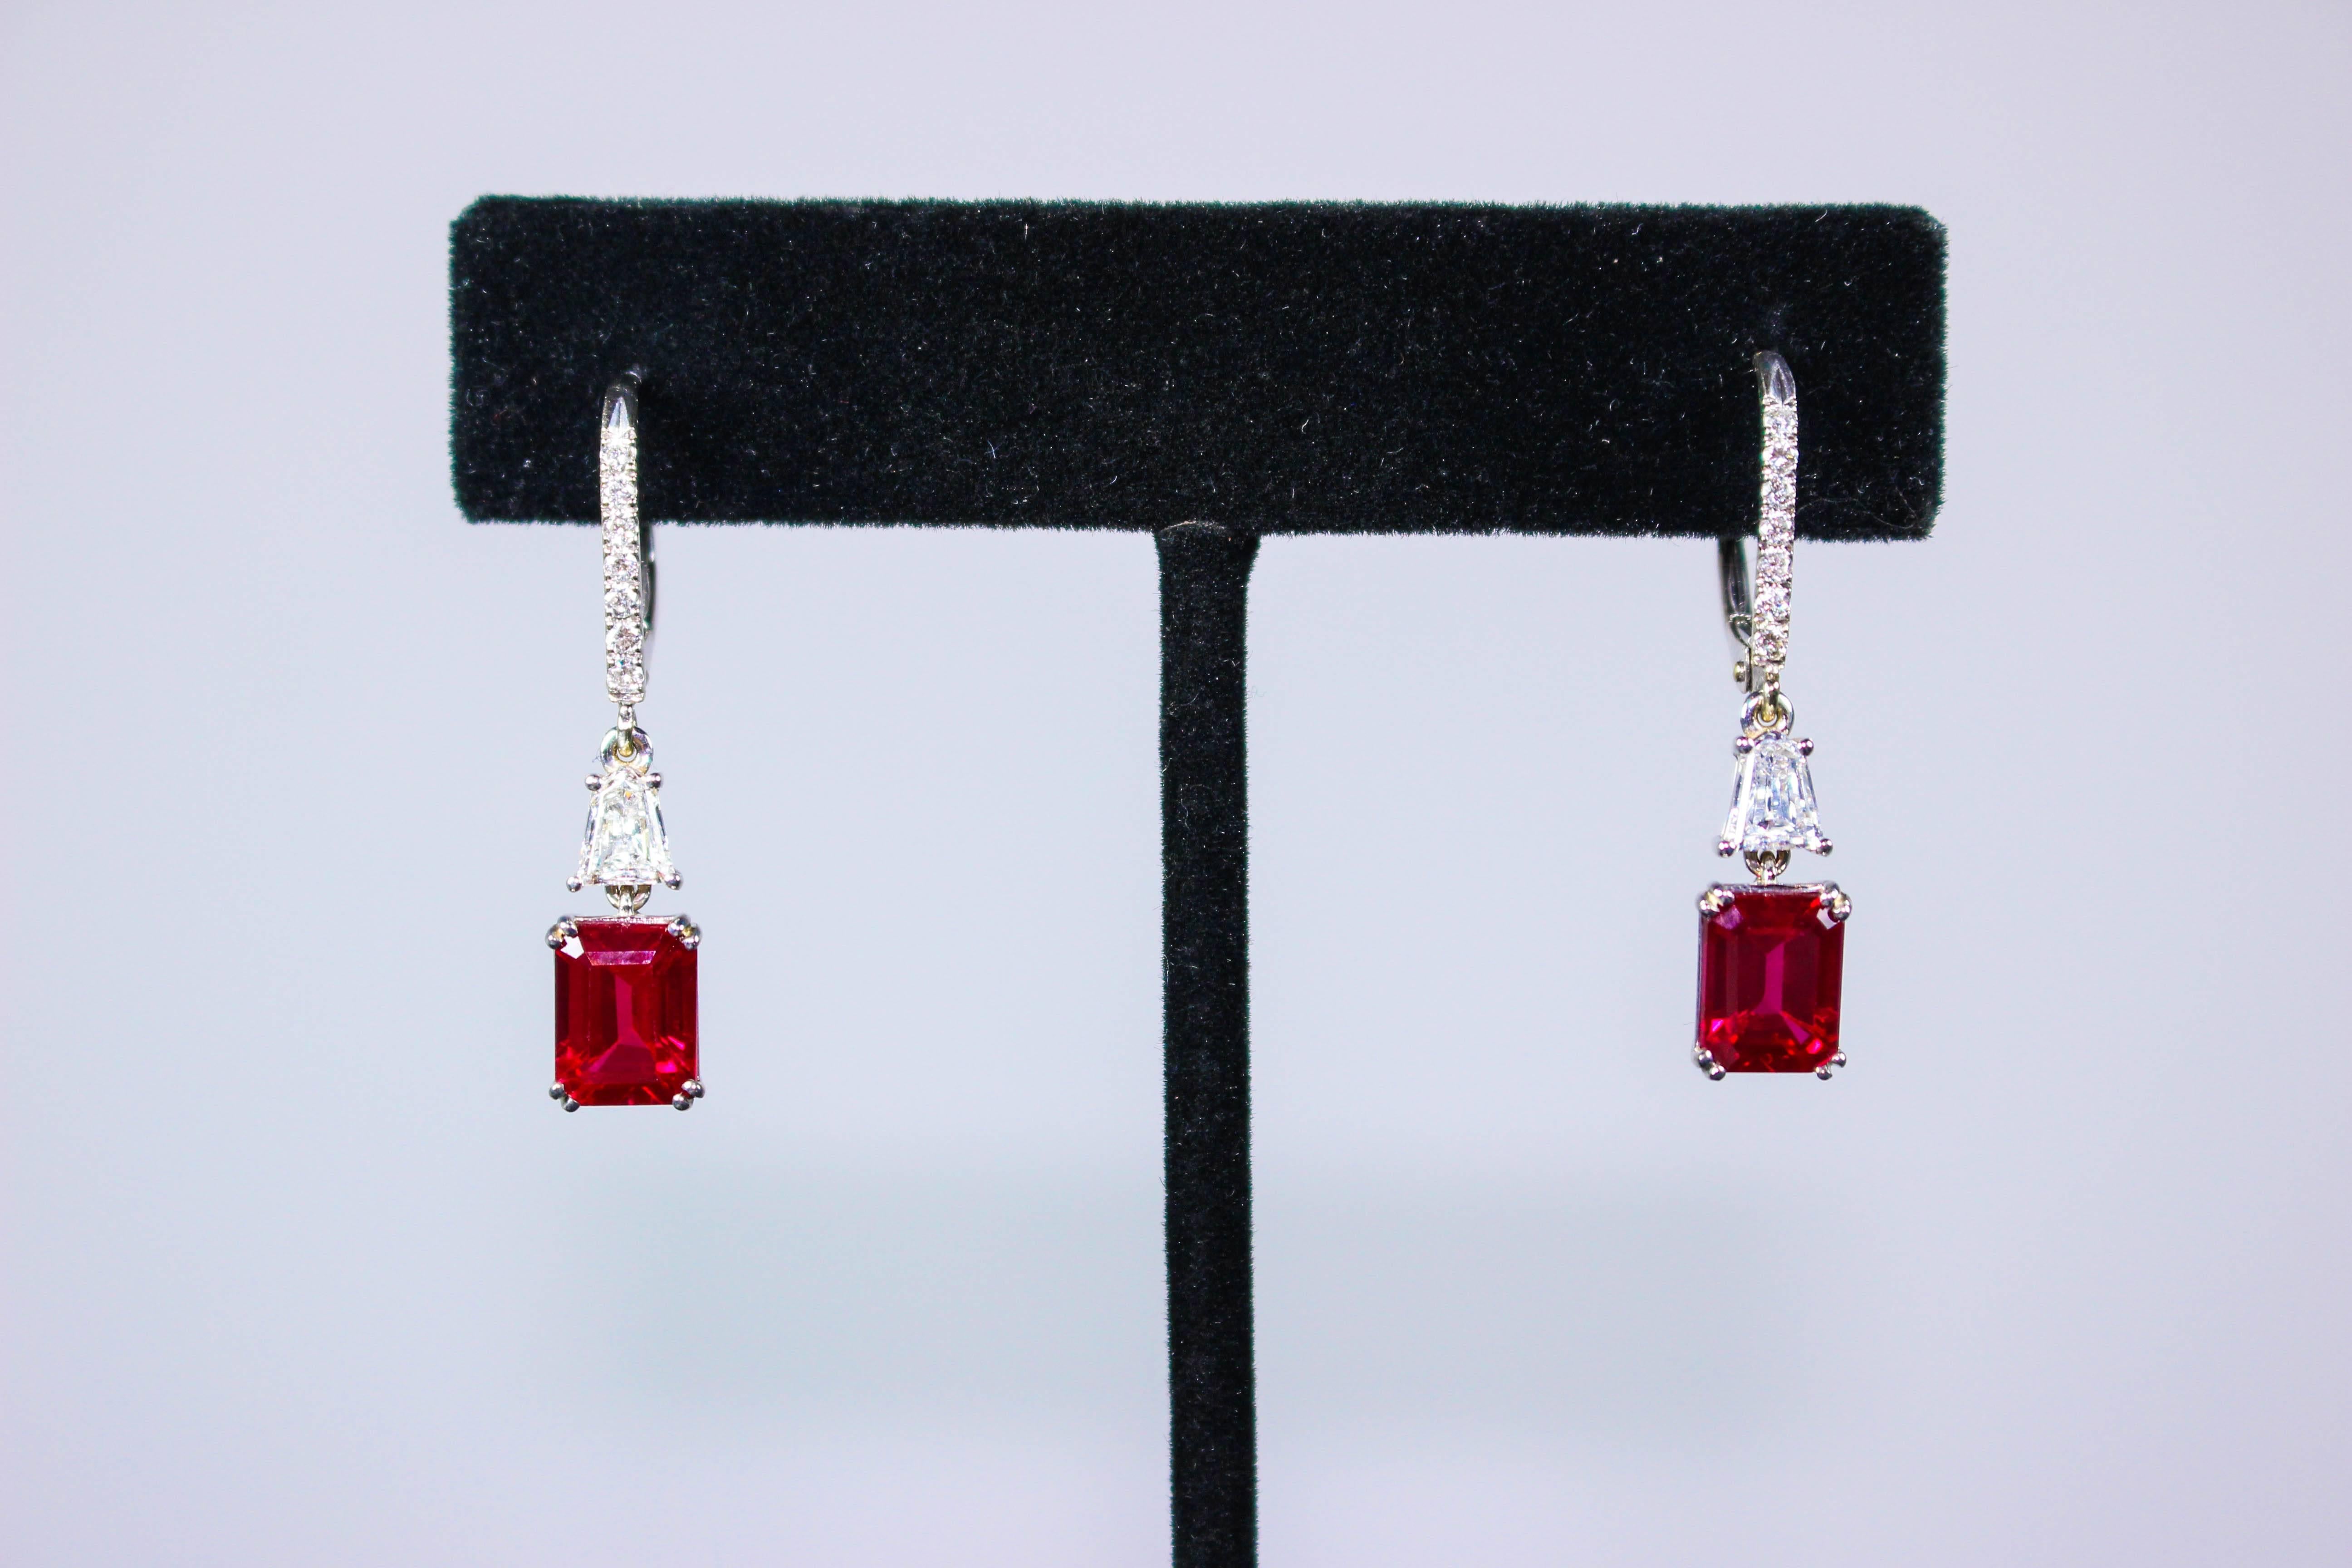 These earrings are composed of 14KT white gold and emerald cut Ruby center stones, with Trillion cut diamond accents, and pave detailing. Stunning earrings in excellent condition.

Please feel free to ask any questions you may have, we are happy to